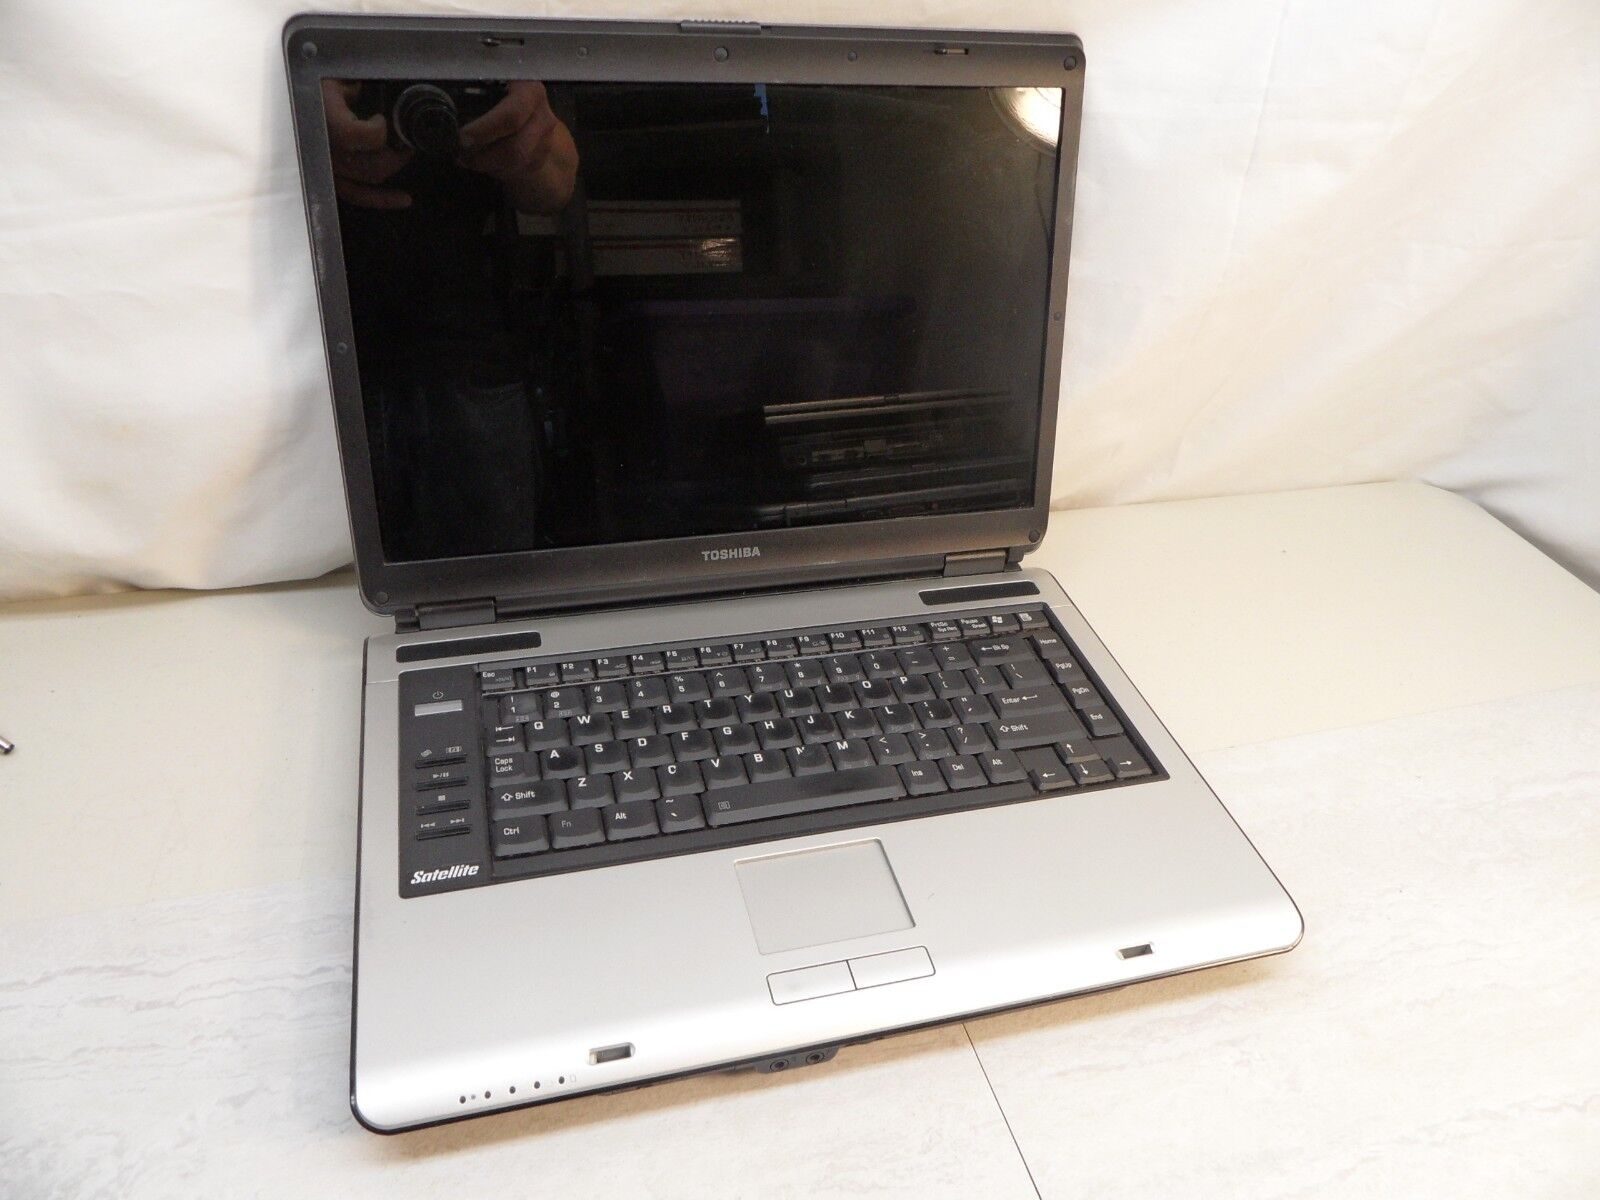 Toshiba Satellite A135-S2356 Parts Laptop 1.6Ghz No Hard Drive Posted To Bios